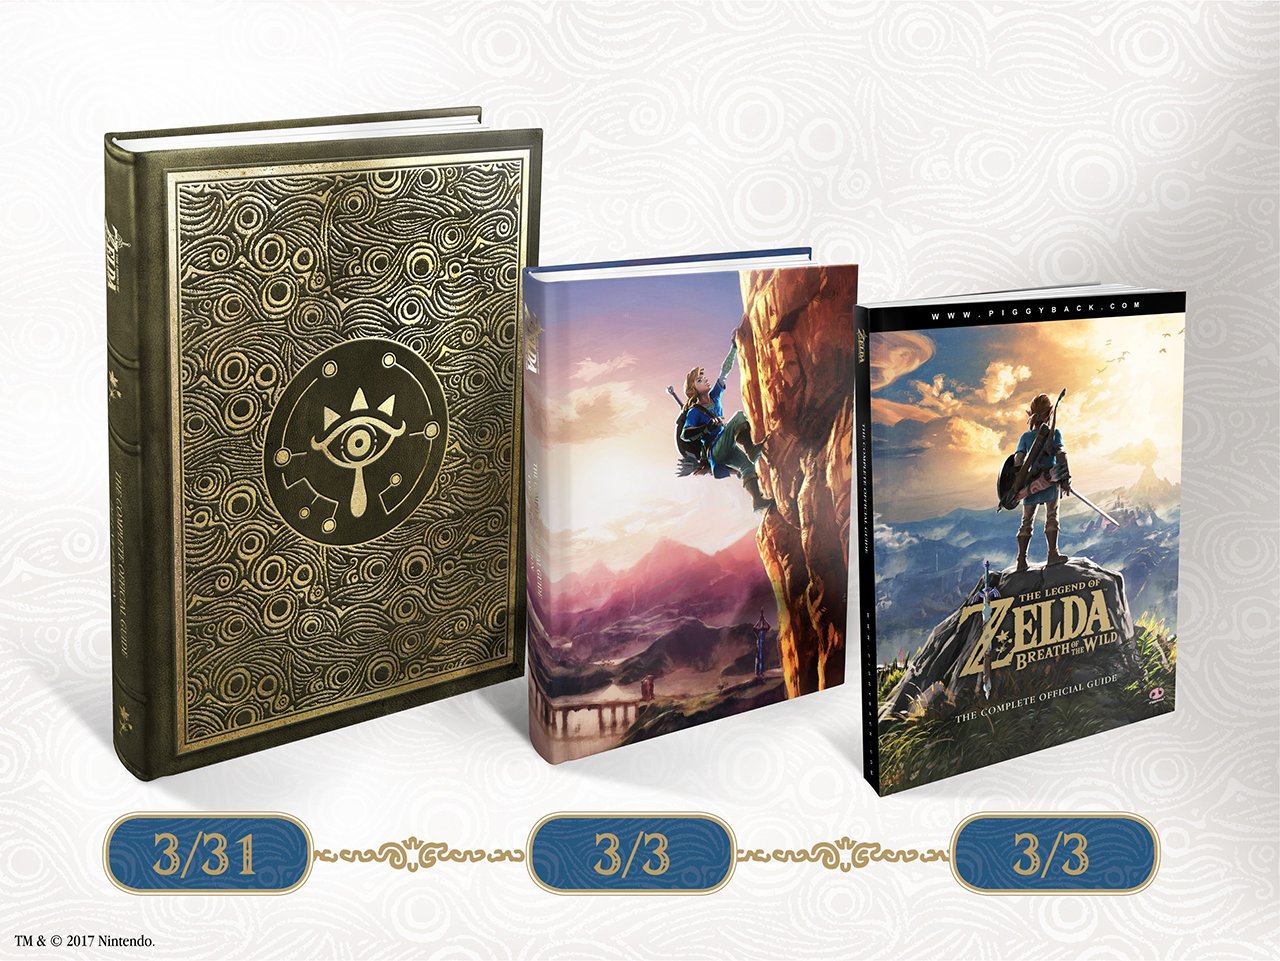 Zelda: Breath of the Wild guide incoming from Piggyback